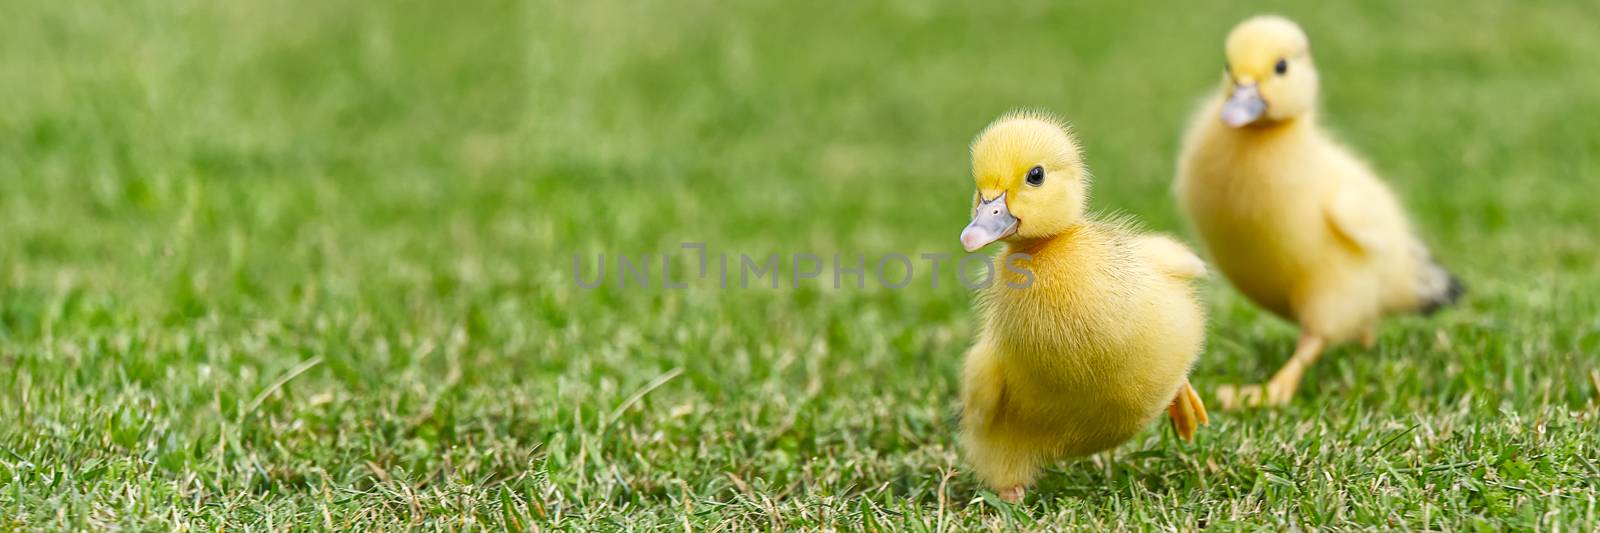 Small newborn ducklings walking on backyard on green grass. Yellow cute duckling running on meadow field in sunny day. Banner or panoramic shot with duck chick on grass. by PhotoTime